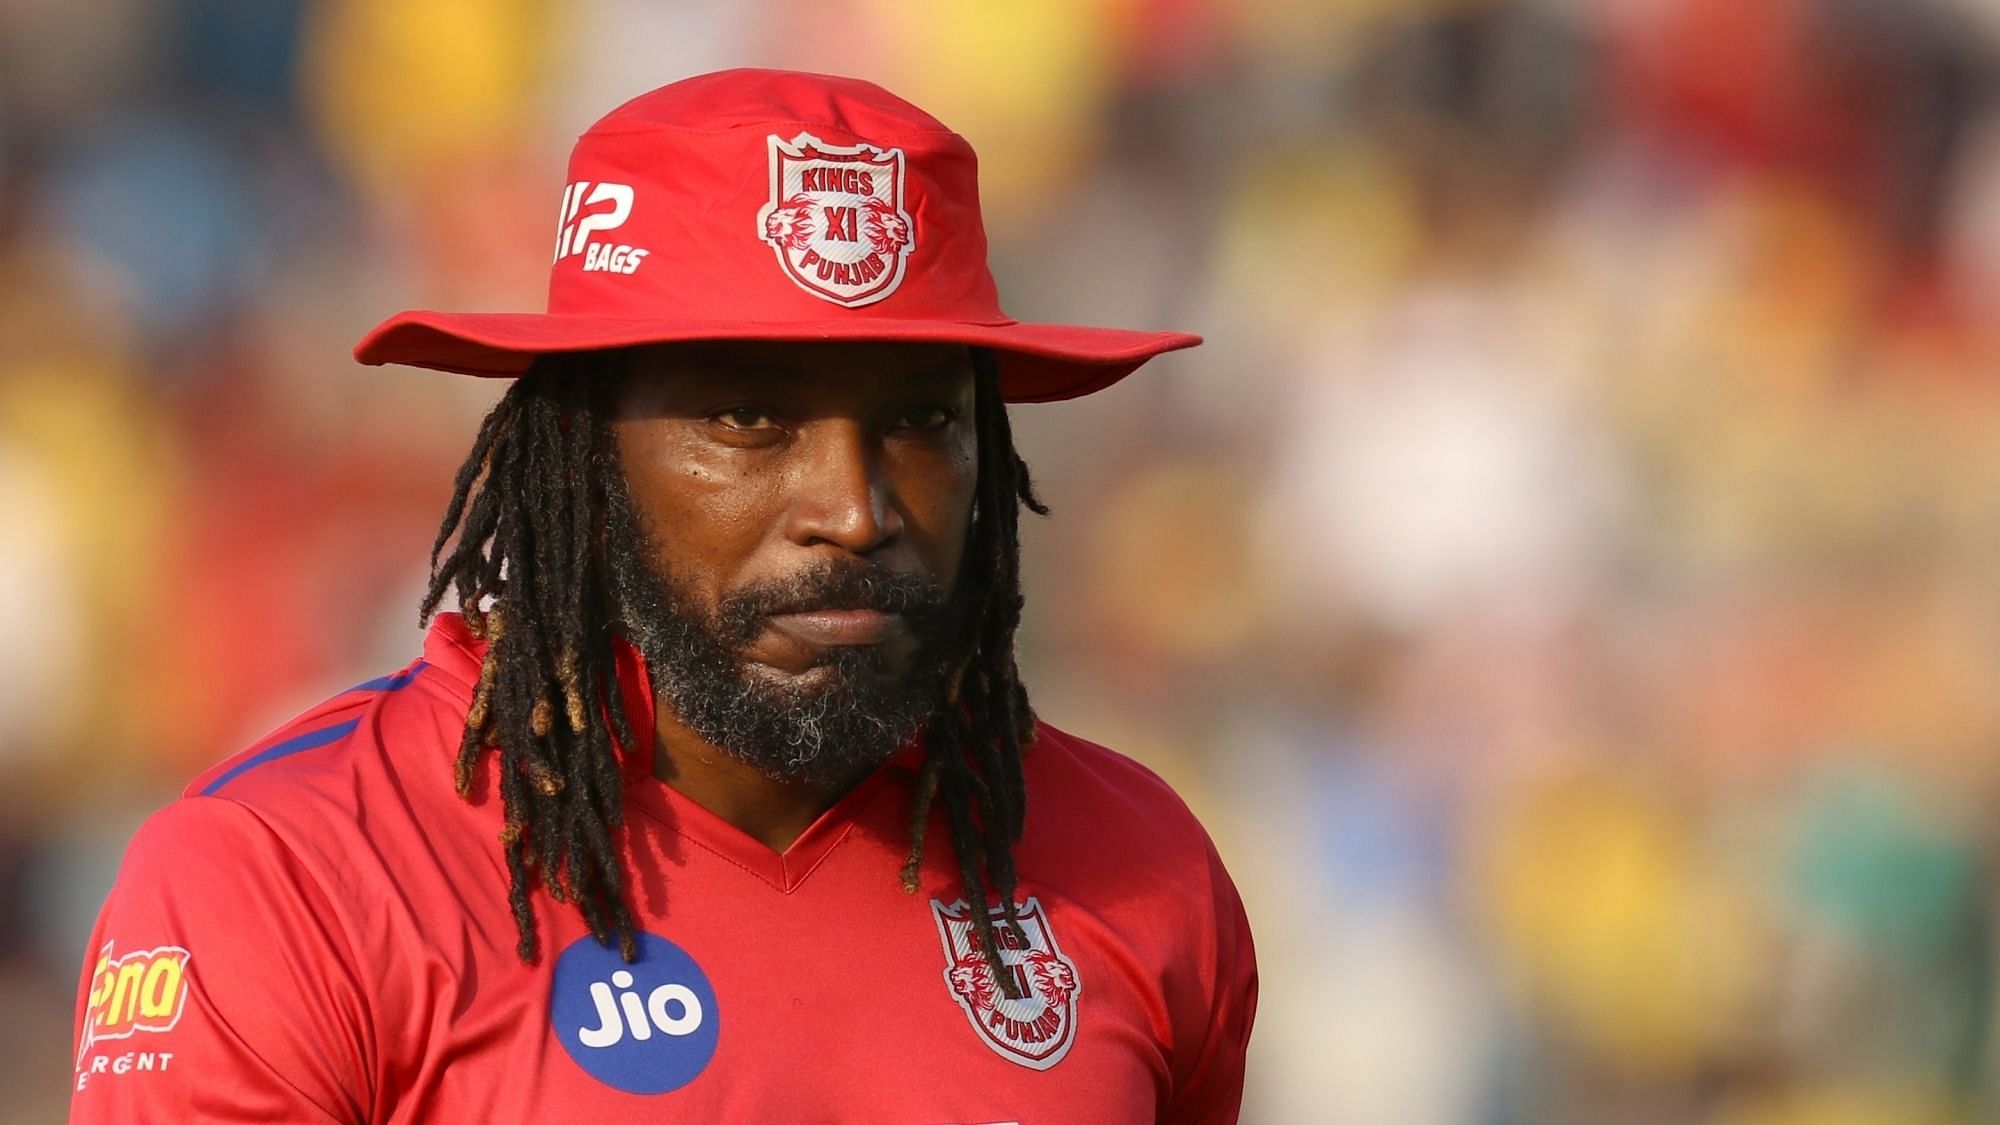 Chris Gayle was supposed to play his first match of the 2020 IPL season but was ruled out at the last moment.